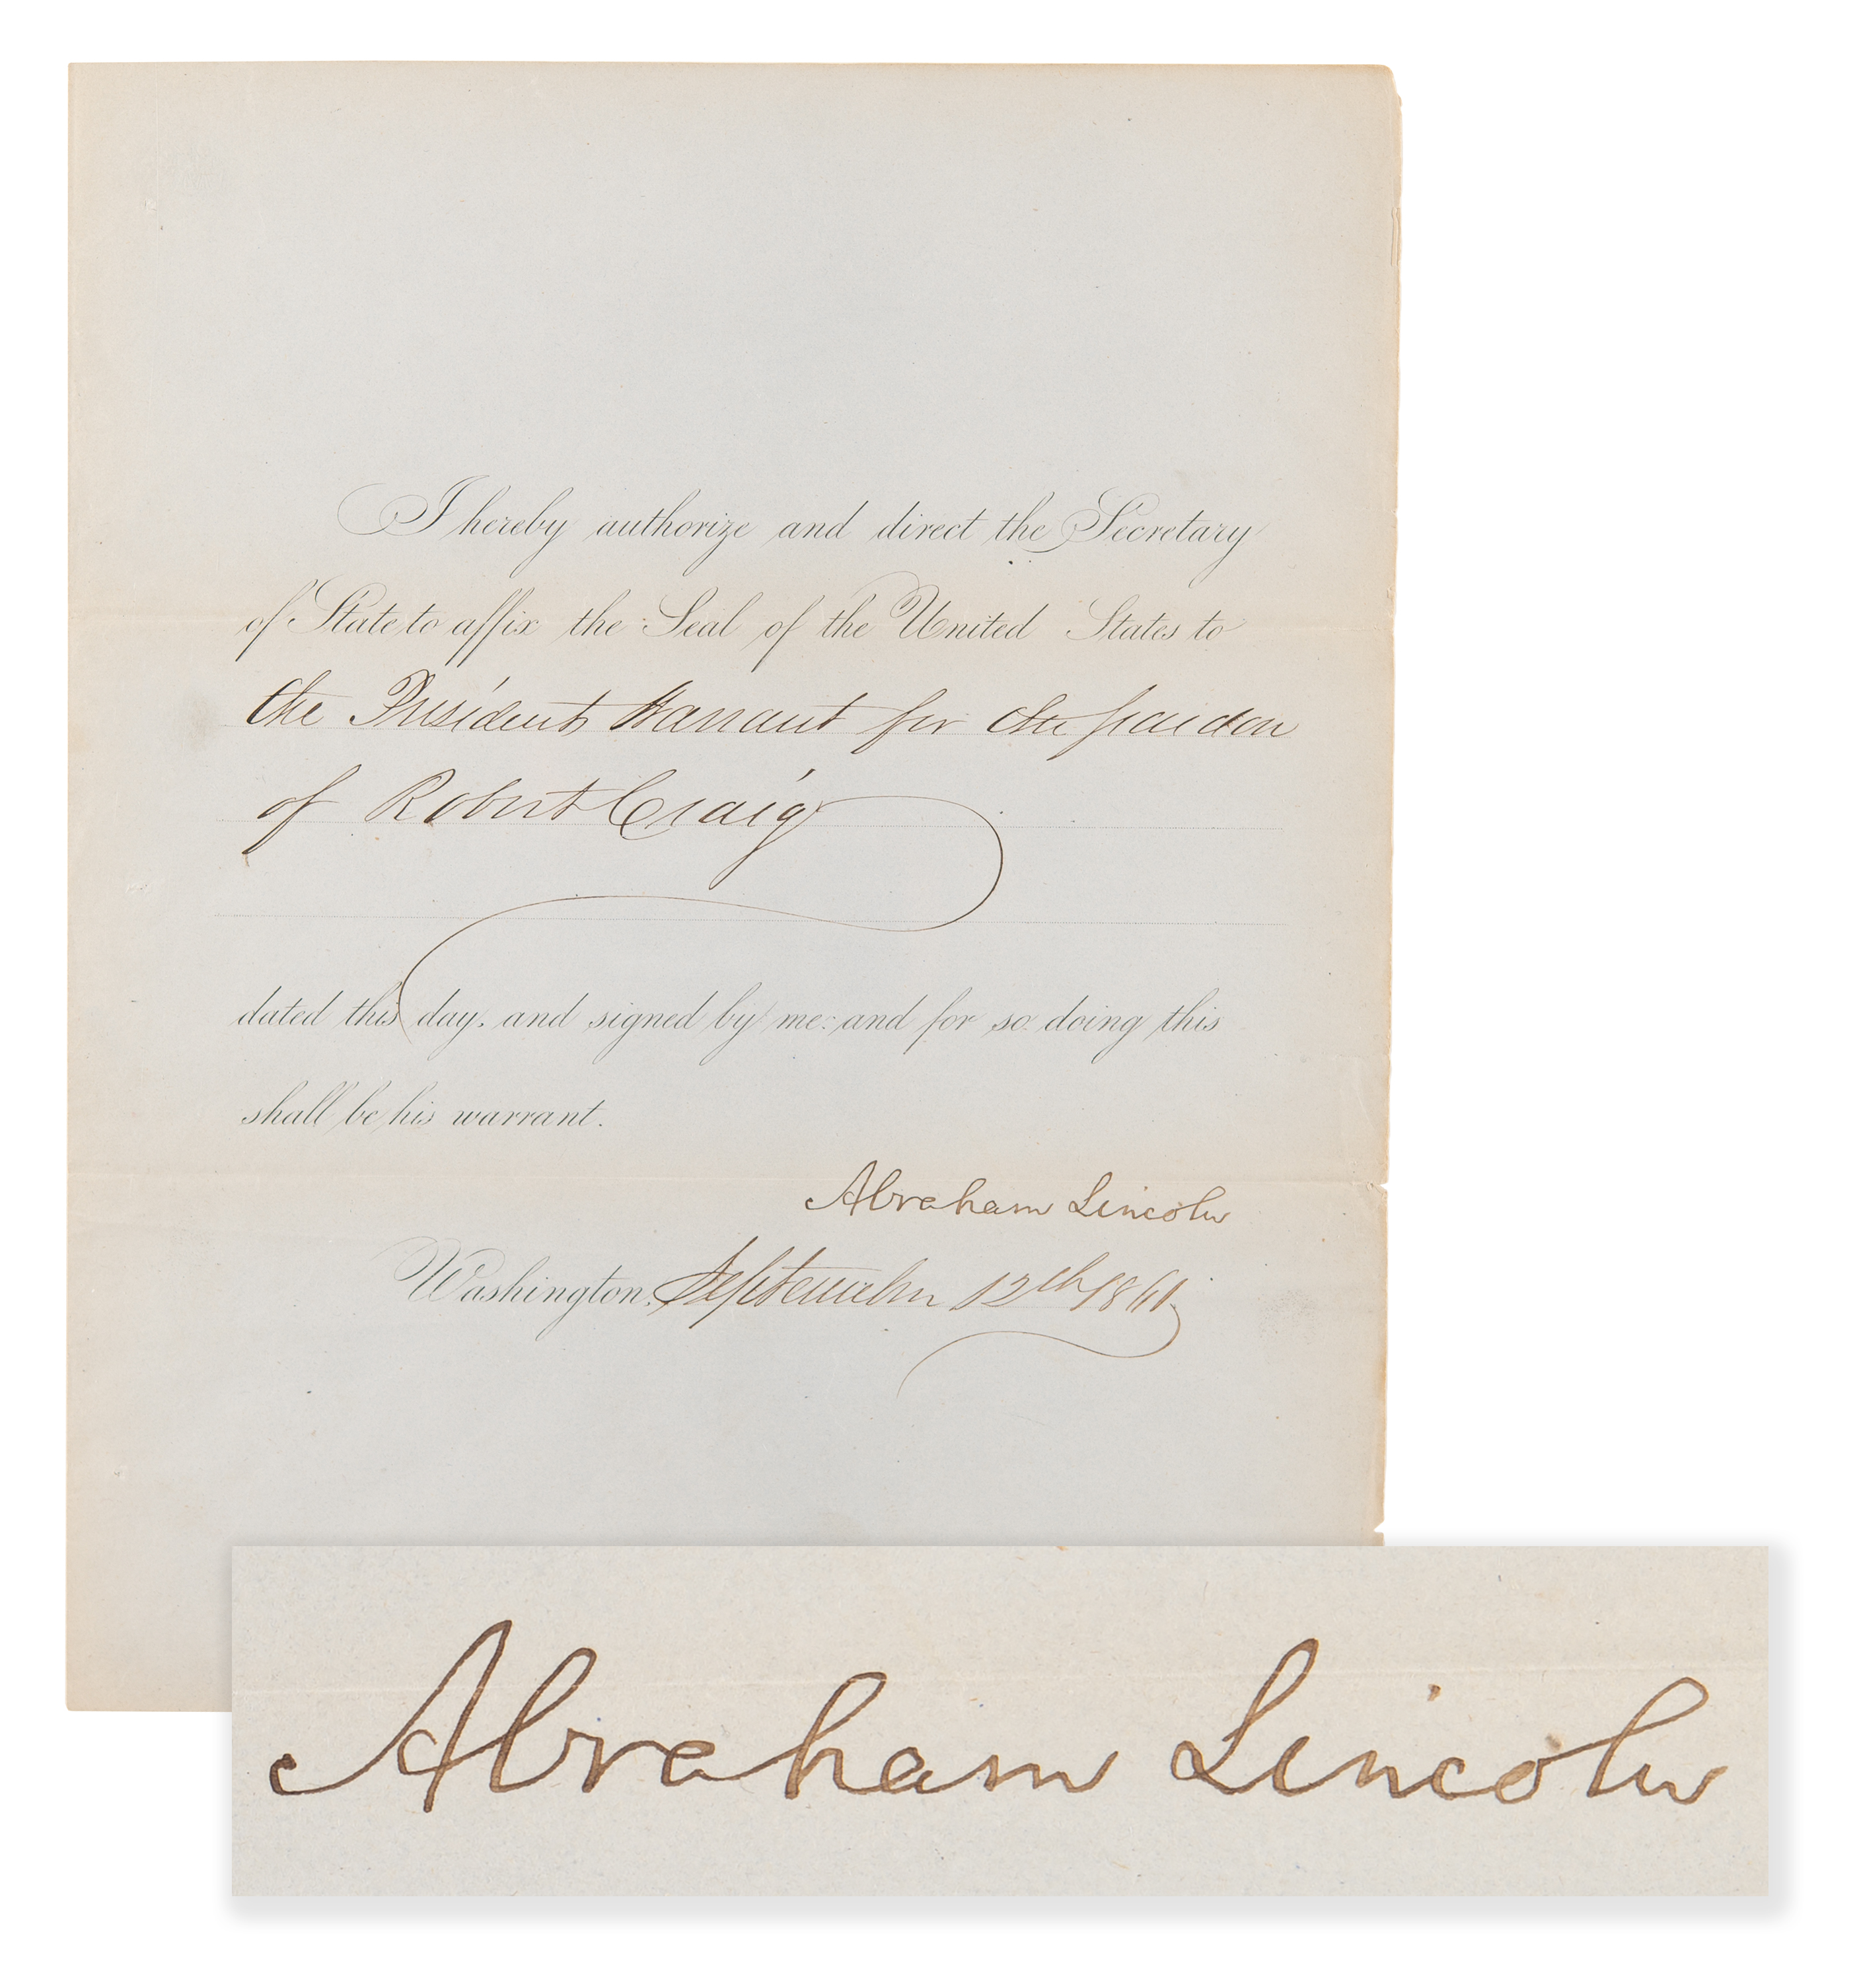 Lot #21 Abraham Lincoln Document Signed as President, Pardoning a Mutiny Leader - Image 1